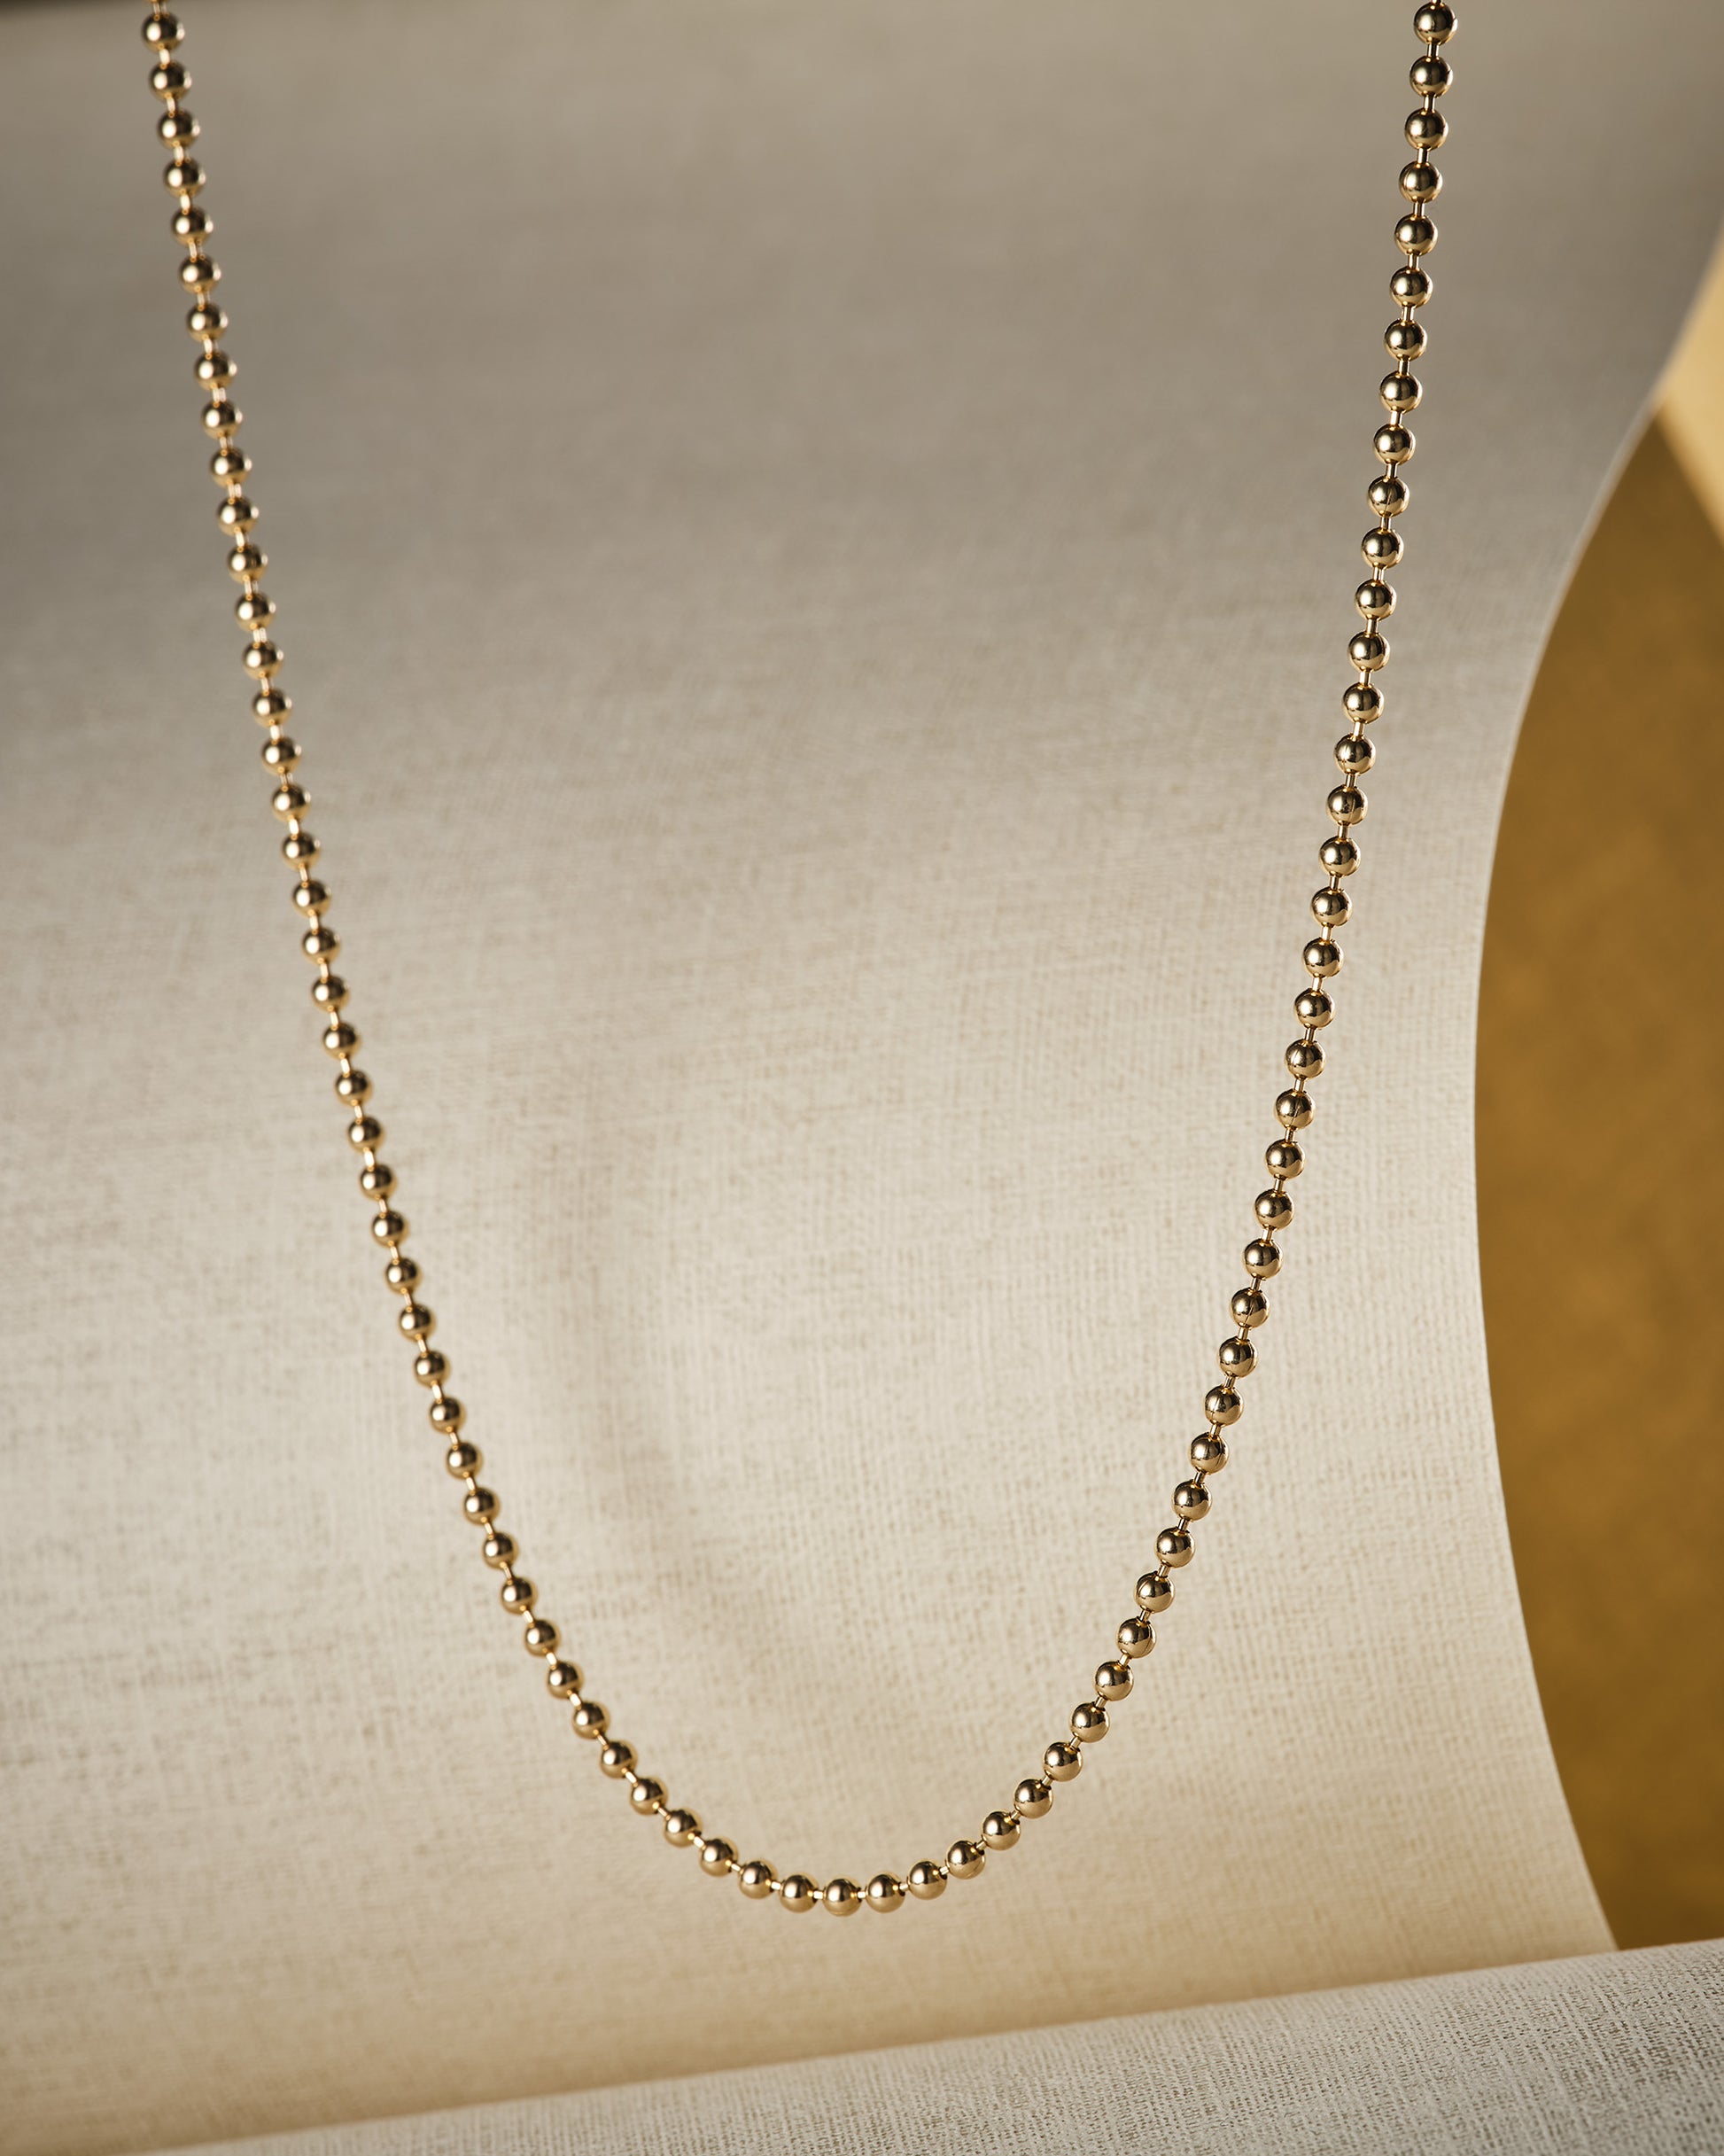 solid gold ball chain on beige background